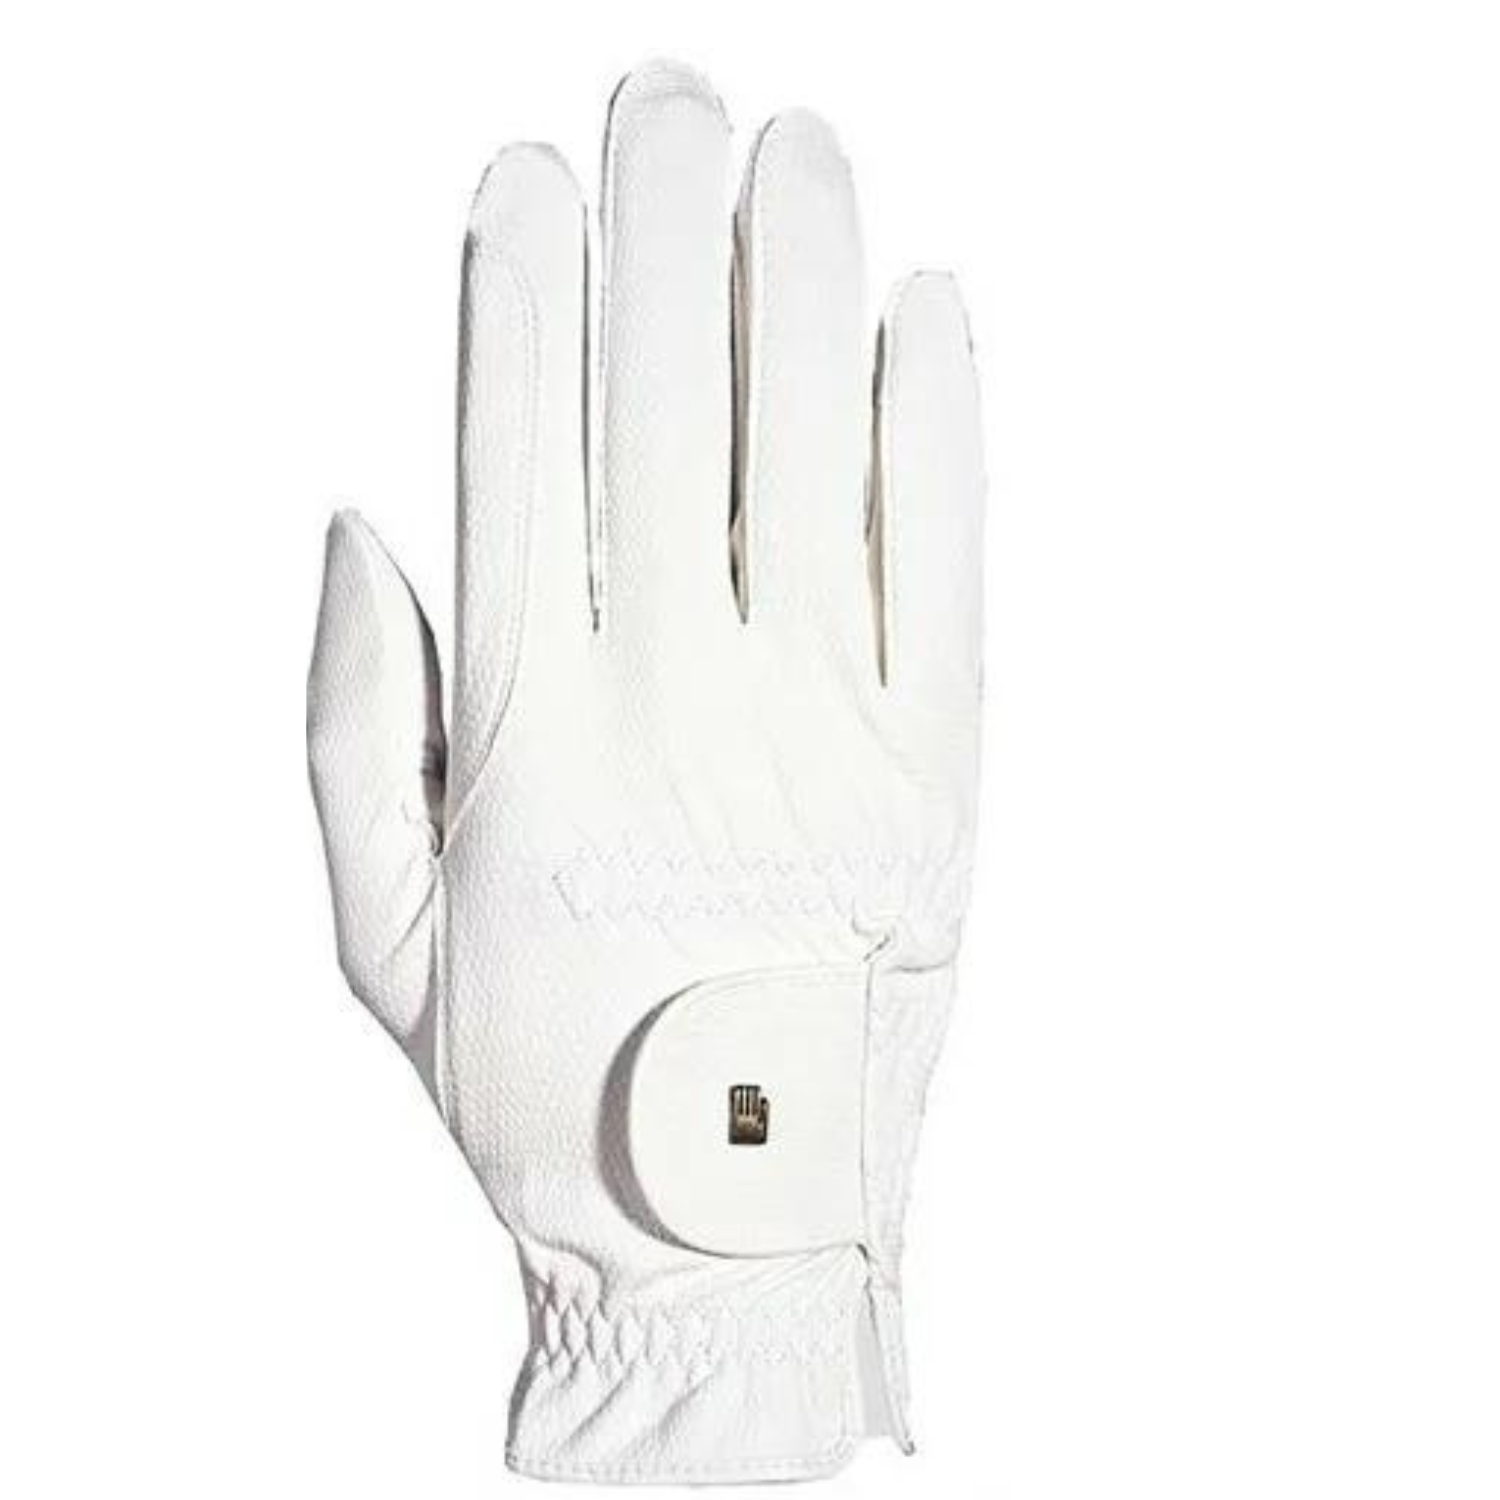 Roeckl Chester Grip Riding Gloves